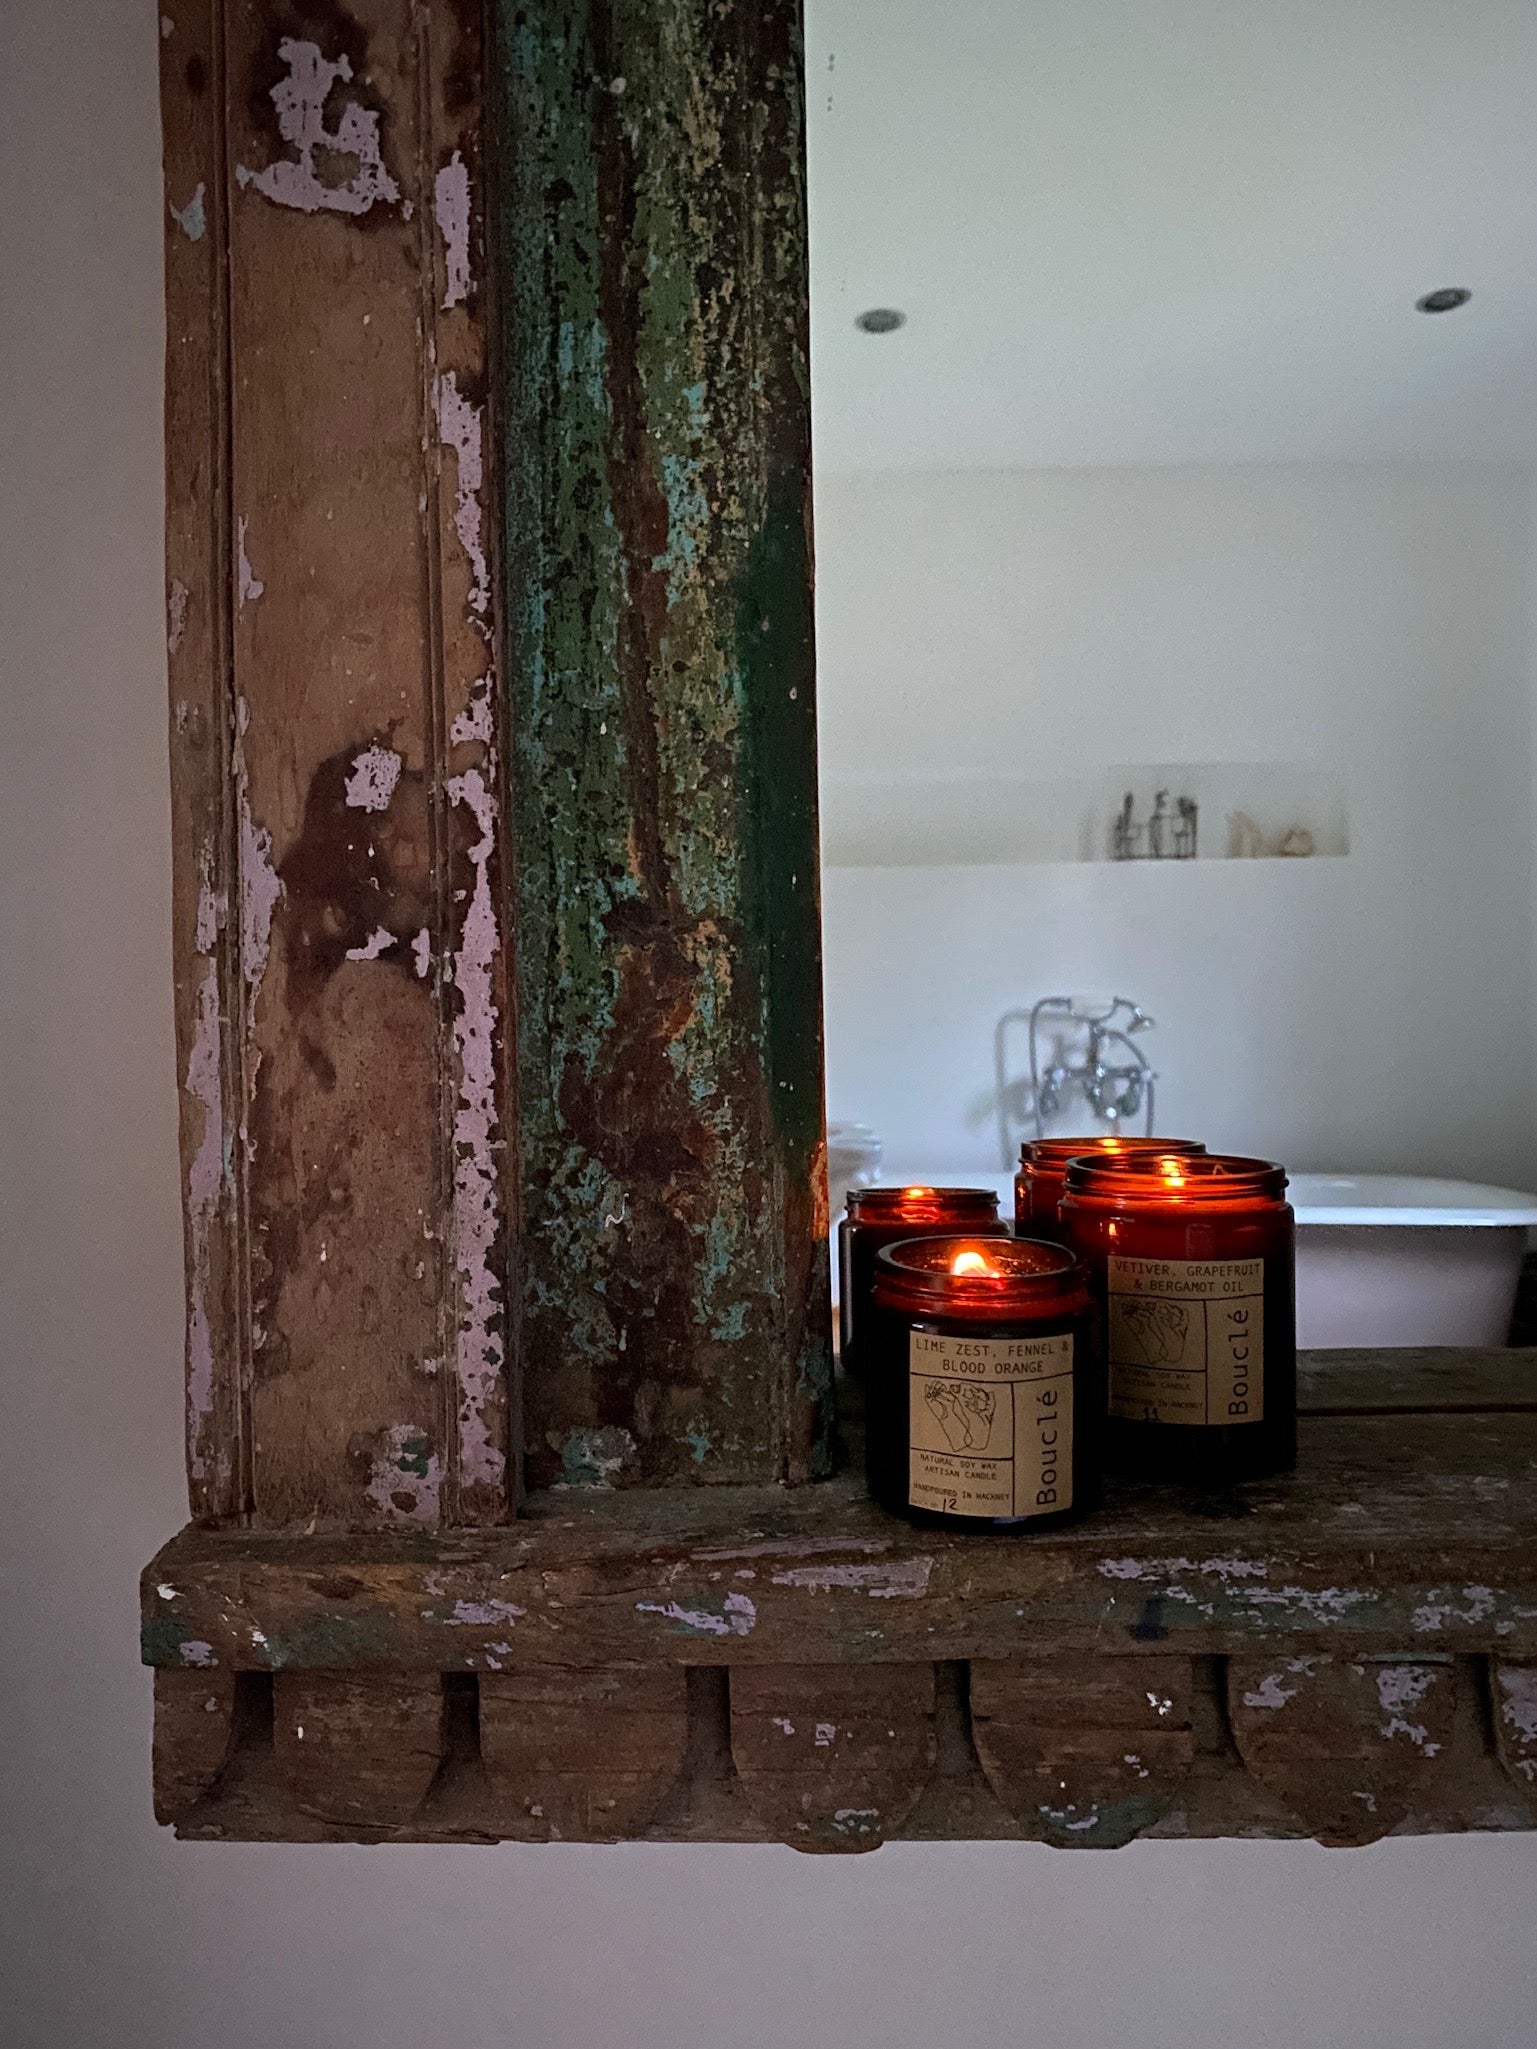 Summer soy wax natural candles lit on the side to create a cosy and homely atmosphere. The scent is relaxing, restoring and invigorating in the home.